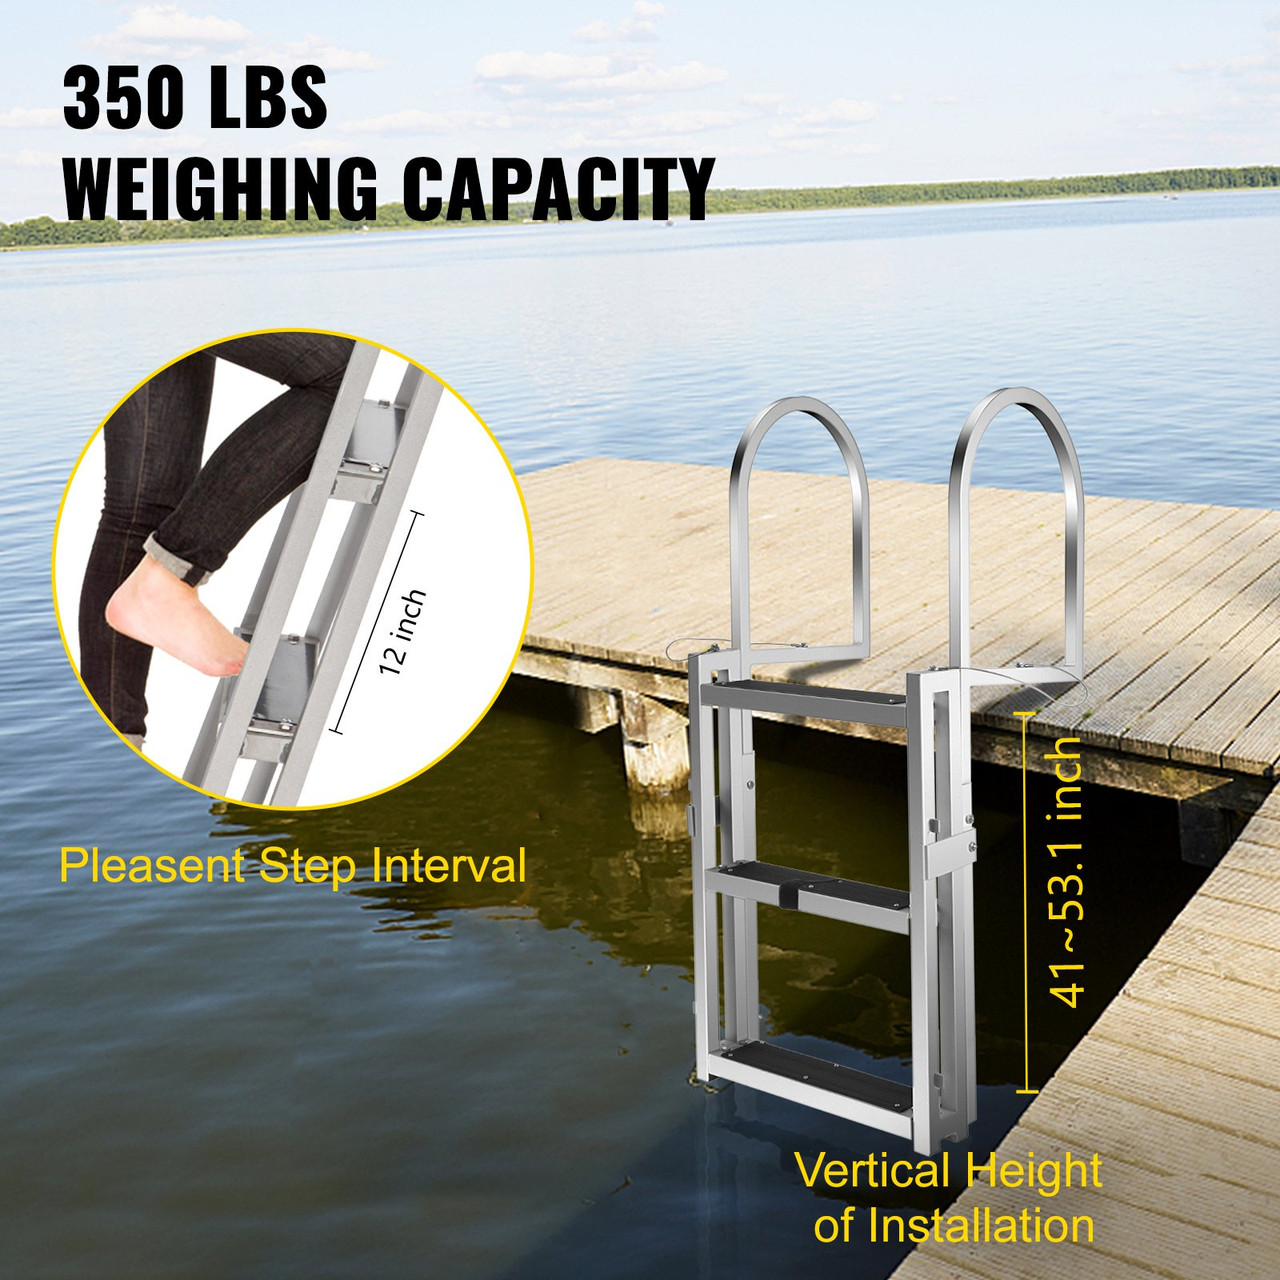 Retractable Dock Ladder with Rubber Mat, Pontoon Boat Ladder 41"-53.1" Adjustable Height, Swim Ladder Aluminum 3 Step, Each Step 20.5" x 4", 330Lbs Load, for Lake, Marine Boarding, Pool